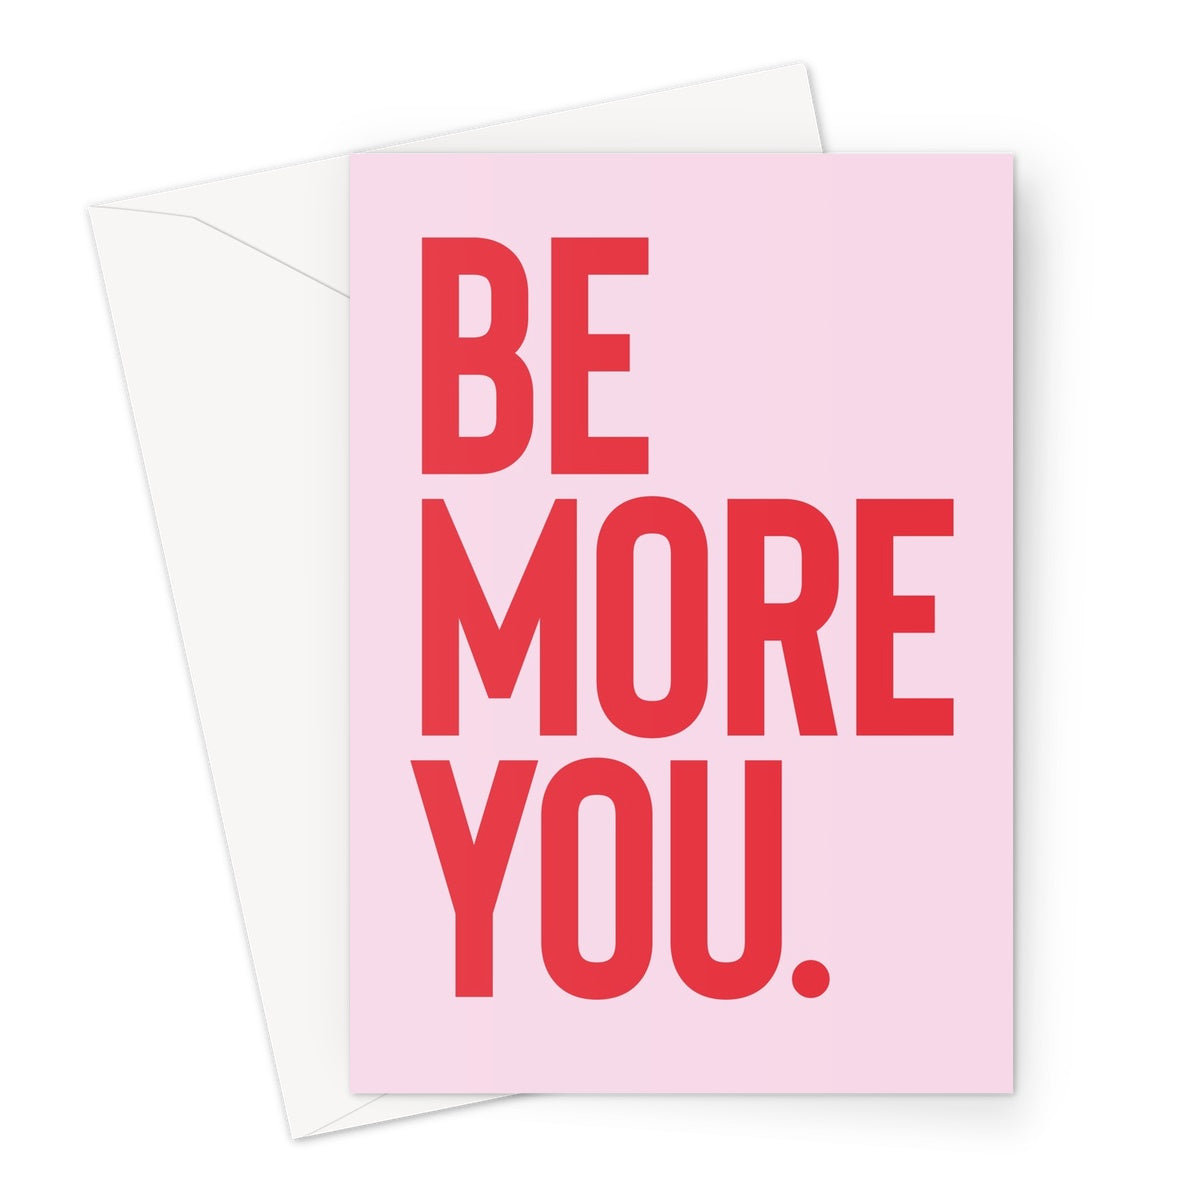 Be More You - Pink / Red Greeting Card